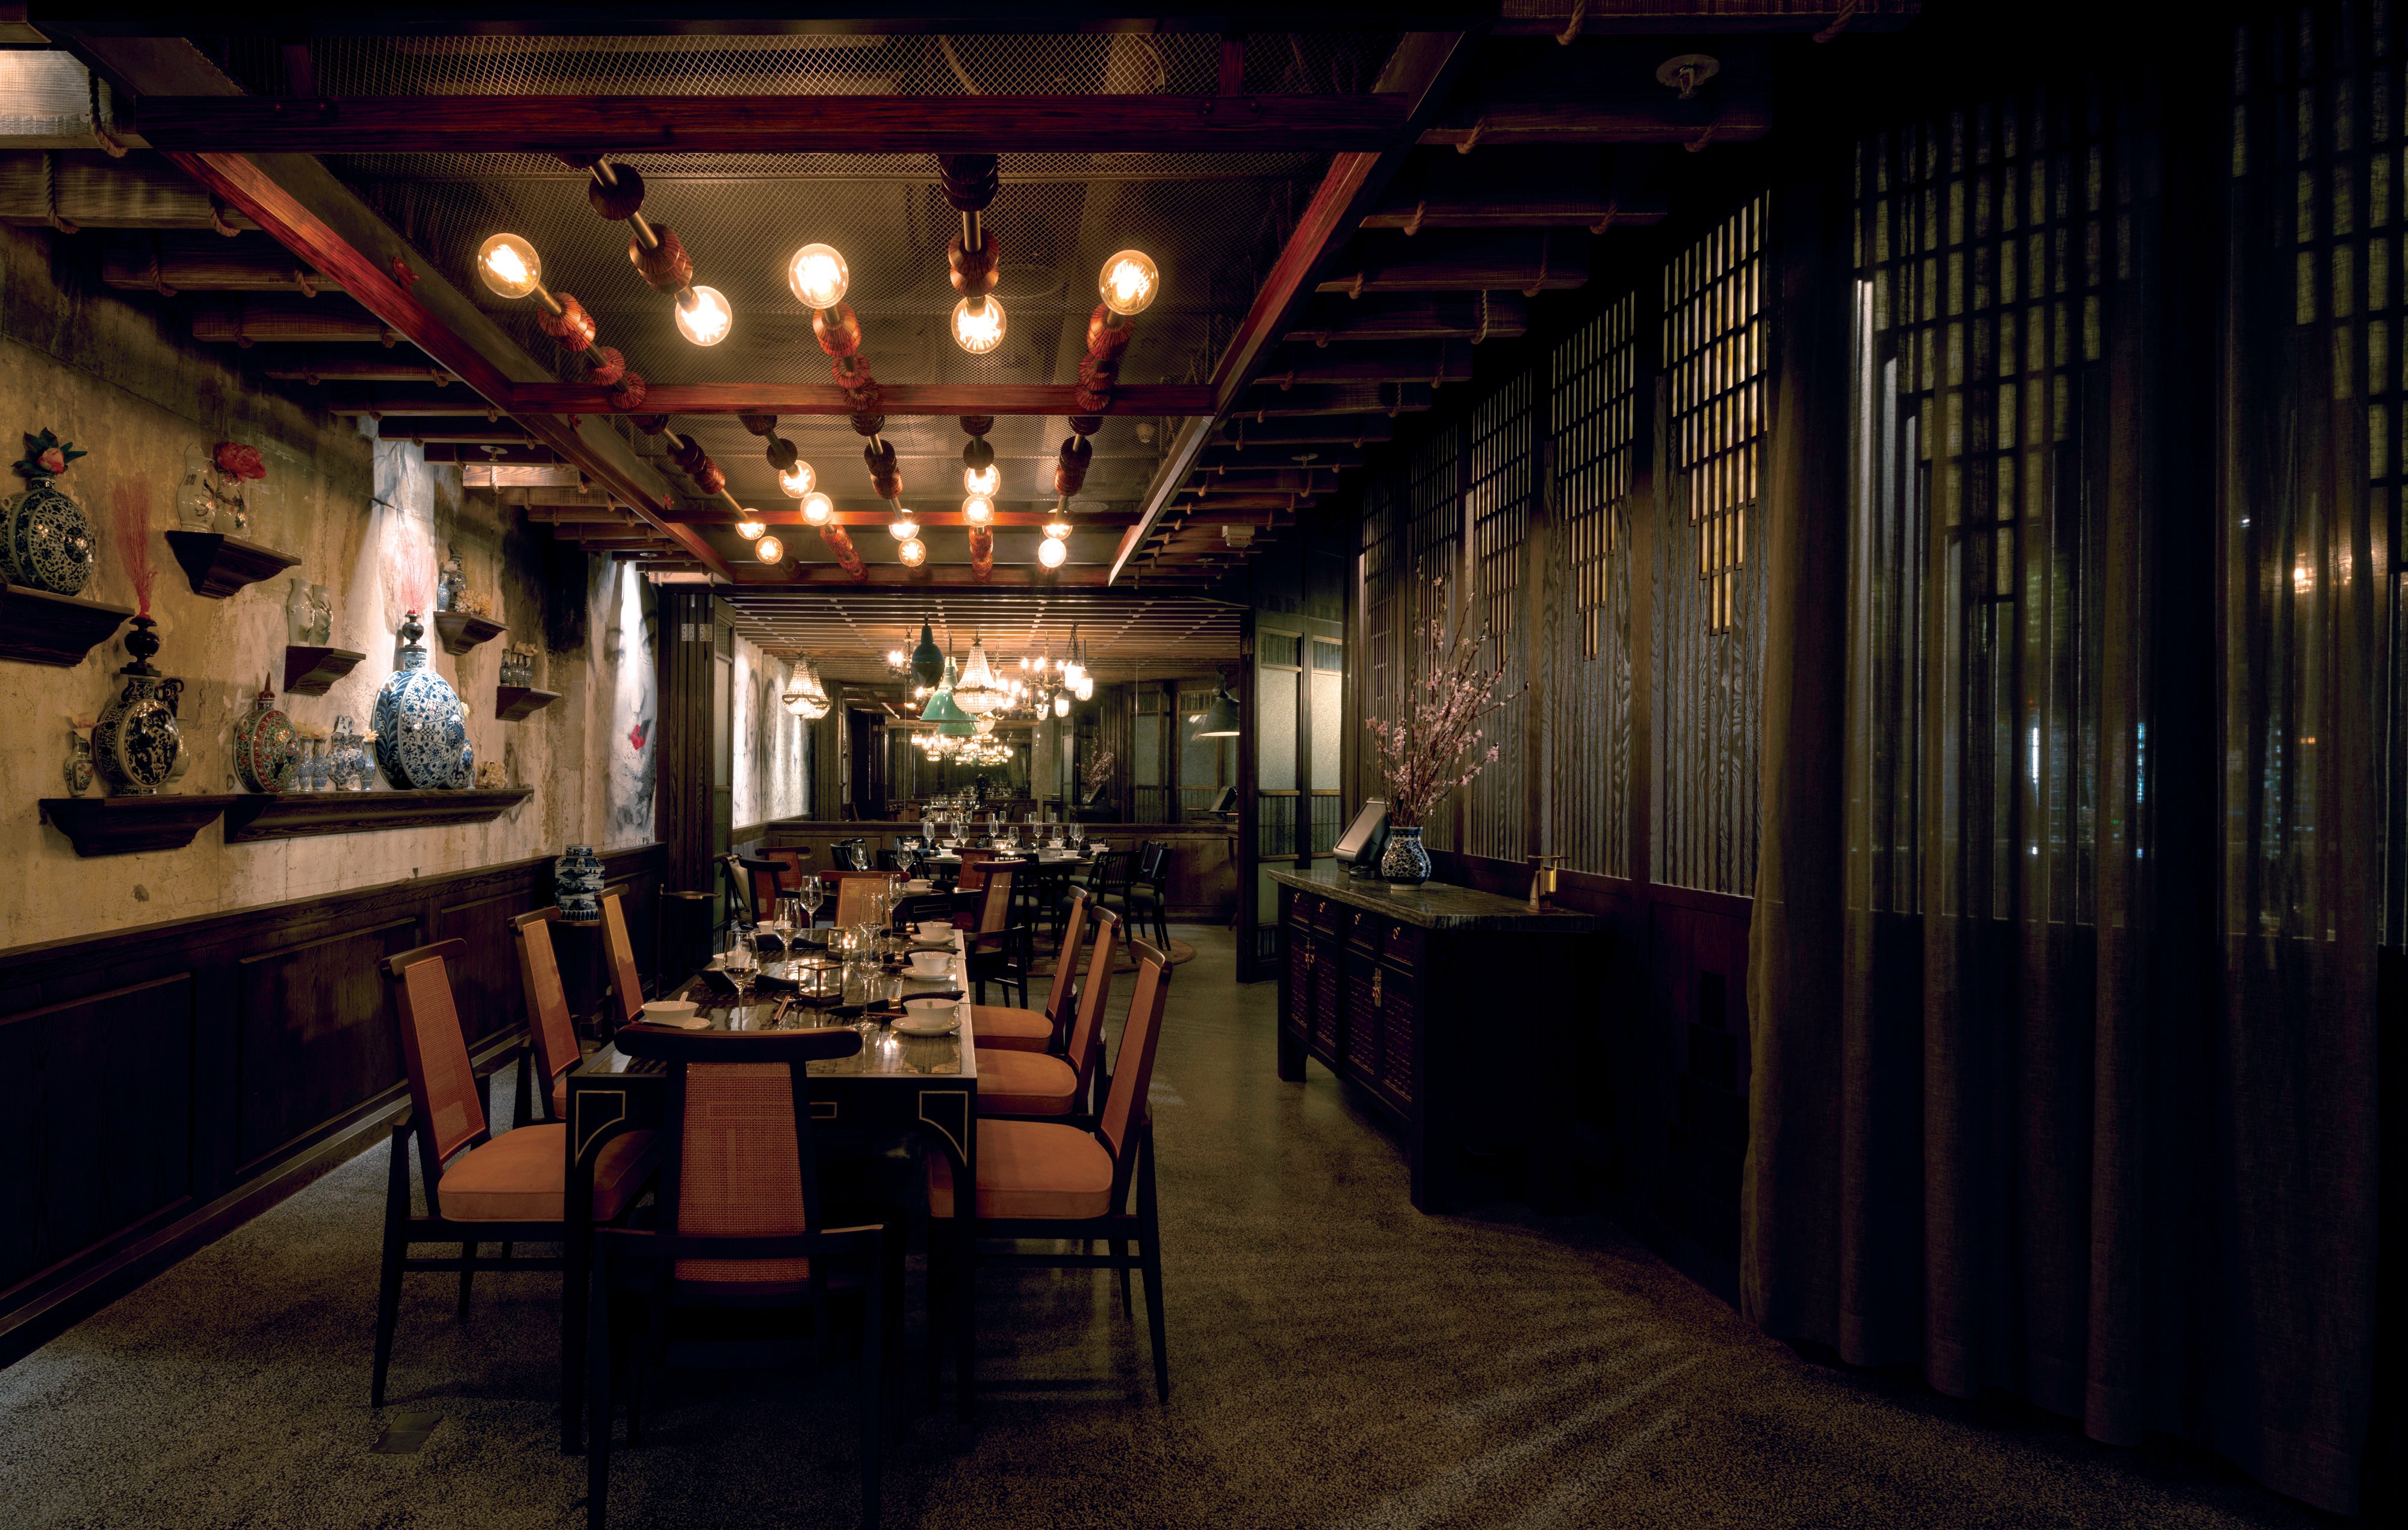 For dining with an arty aesthetic, head to Mott 32 in the Standard Chartered Bank Building